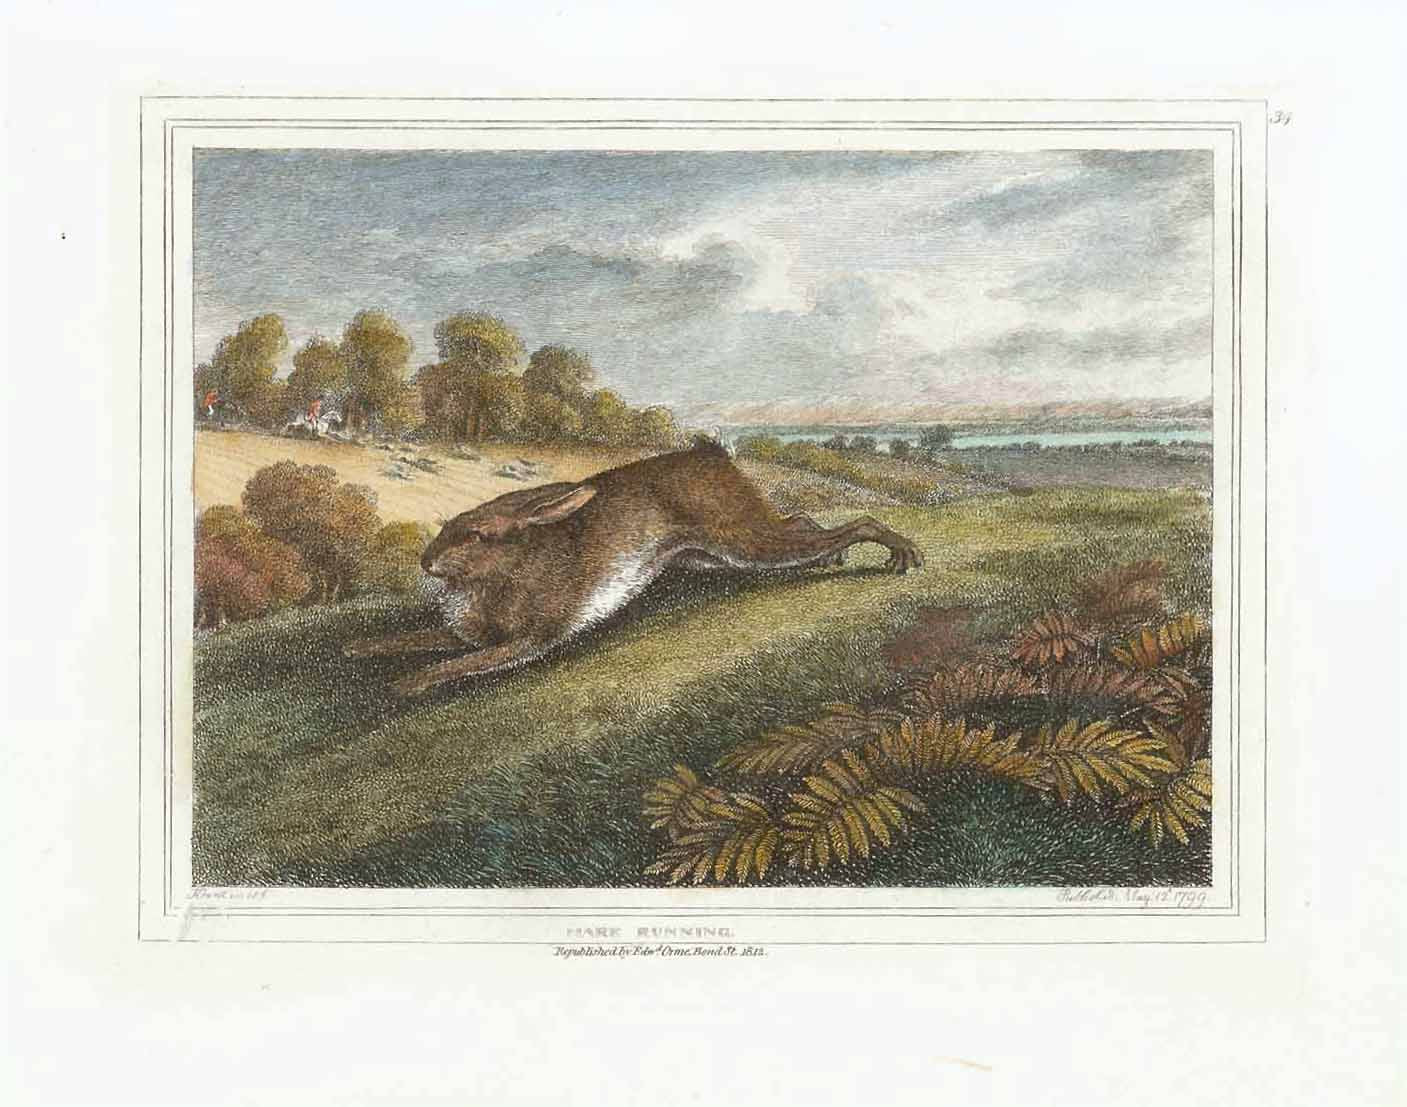 "Hare running"  Hand-colored stipple copper engraving by Samuel Howitt (1756-1822)  A hare running for his or her life  Published in London, dated 1799